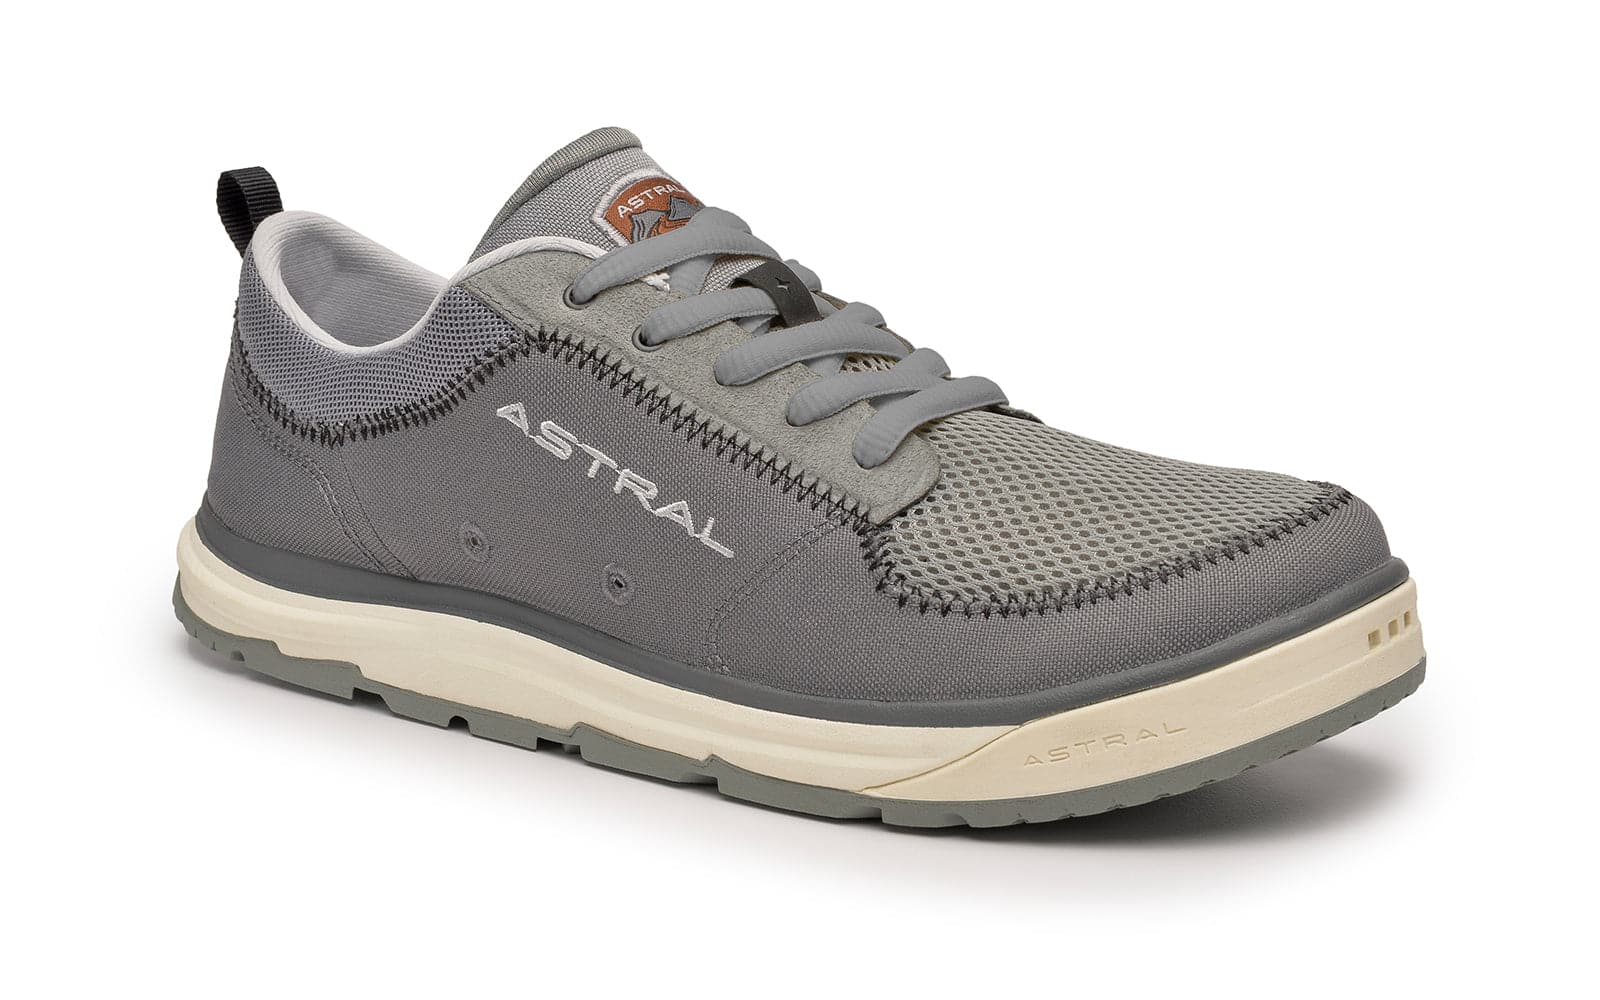 Featuring the Brewer 2.0 - Men's men's footwear, watersports manufactured by Astral shown here from a thirteenth angle.